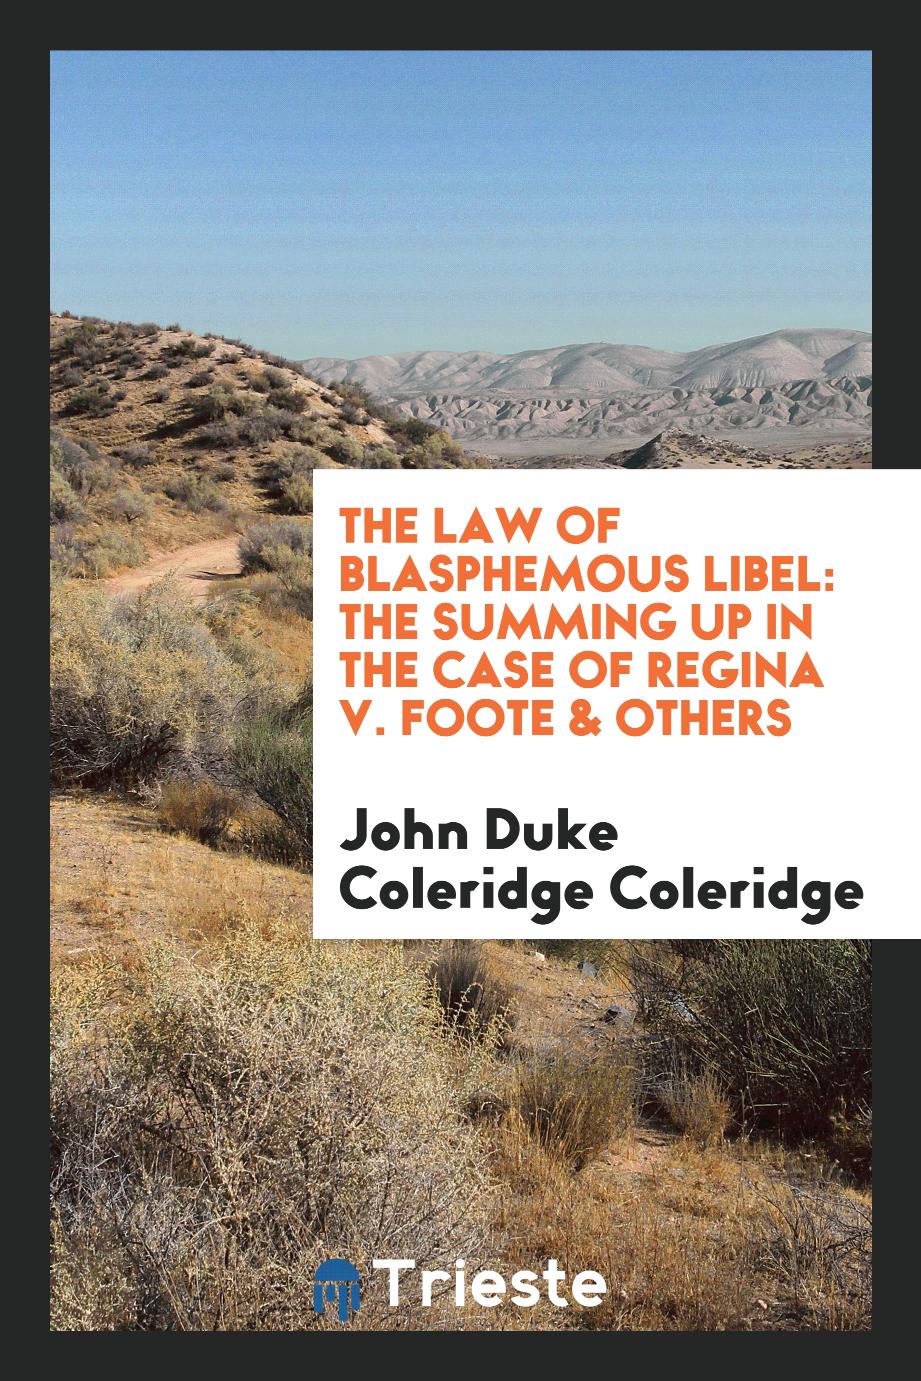 The Law of Blasphemous Libel: The Summing Up in the Case of Regina V. Foote & Others